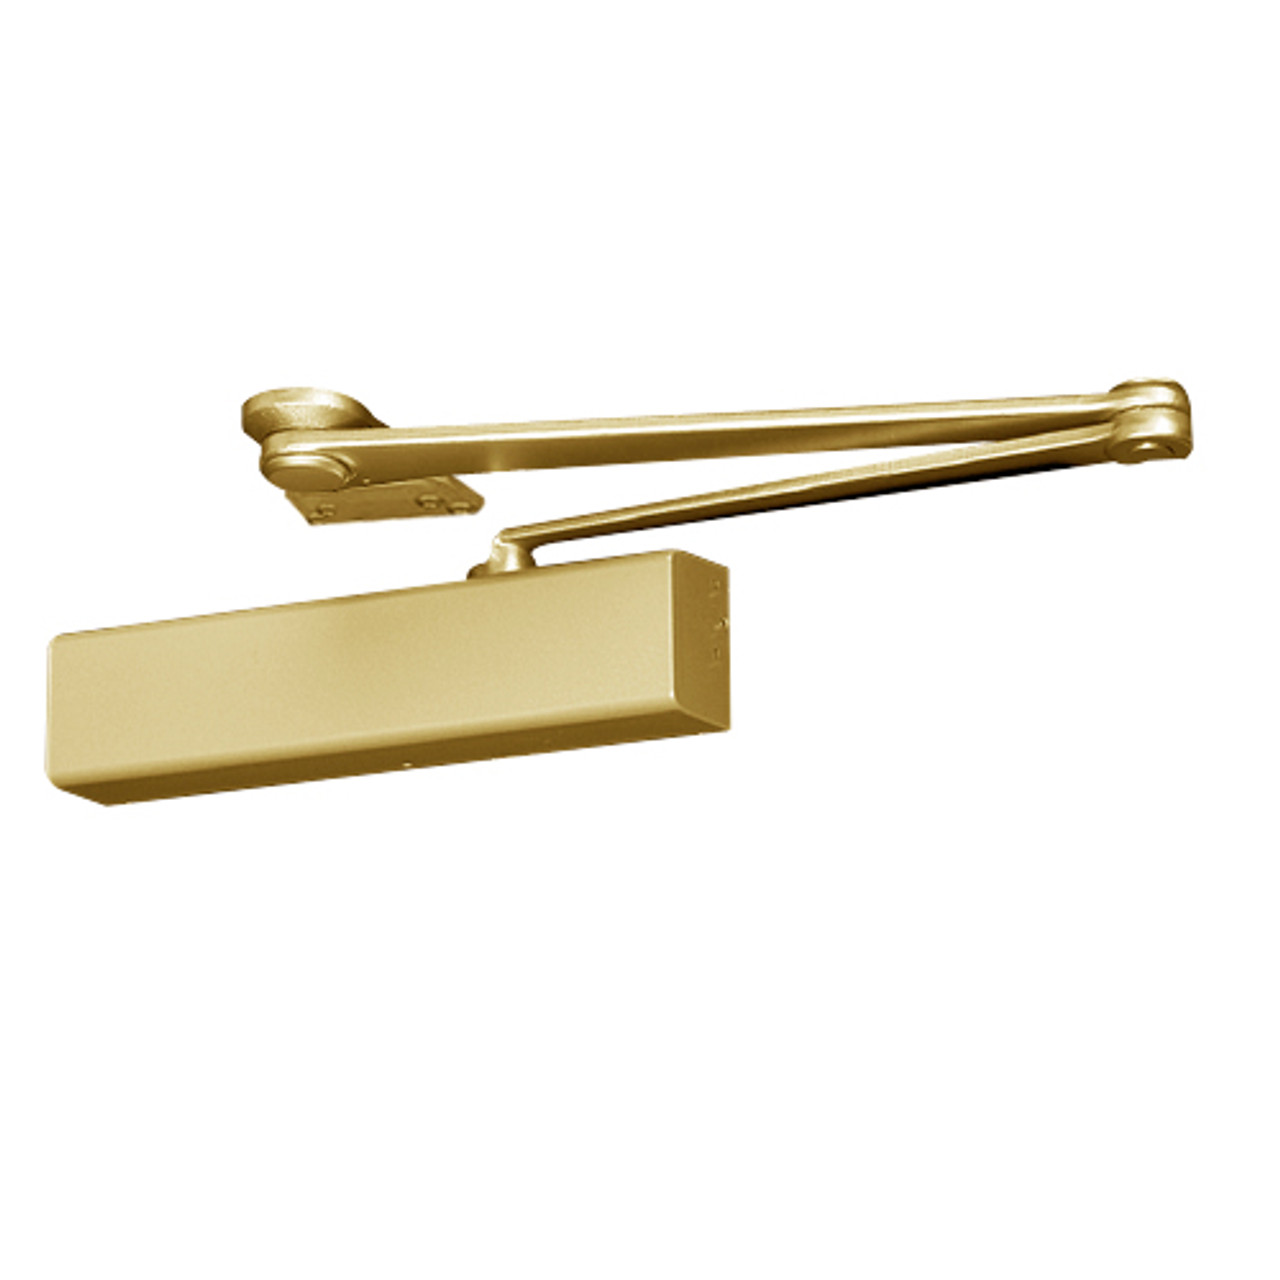 PR8501HDA-RH-696 Norton 8000 Series Full Cover Hold Open Door Closers with Parallel Rigid Arm in Gold Finish